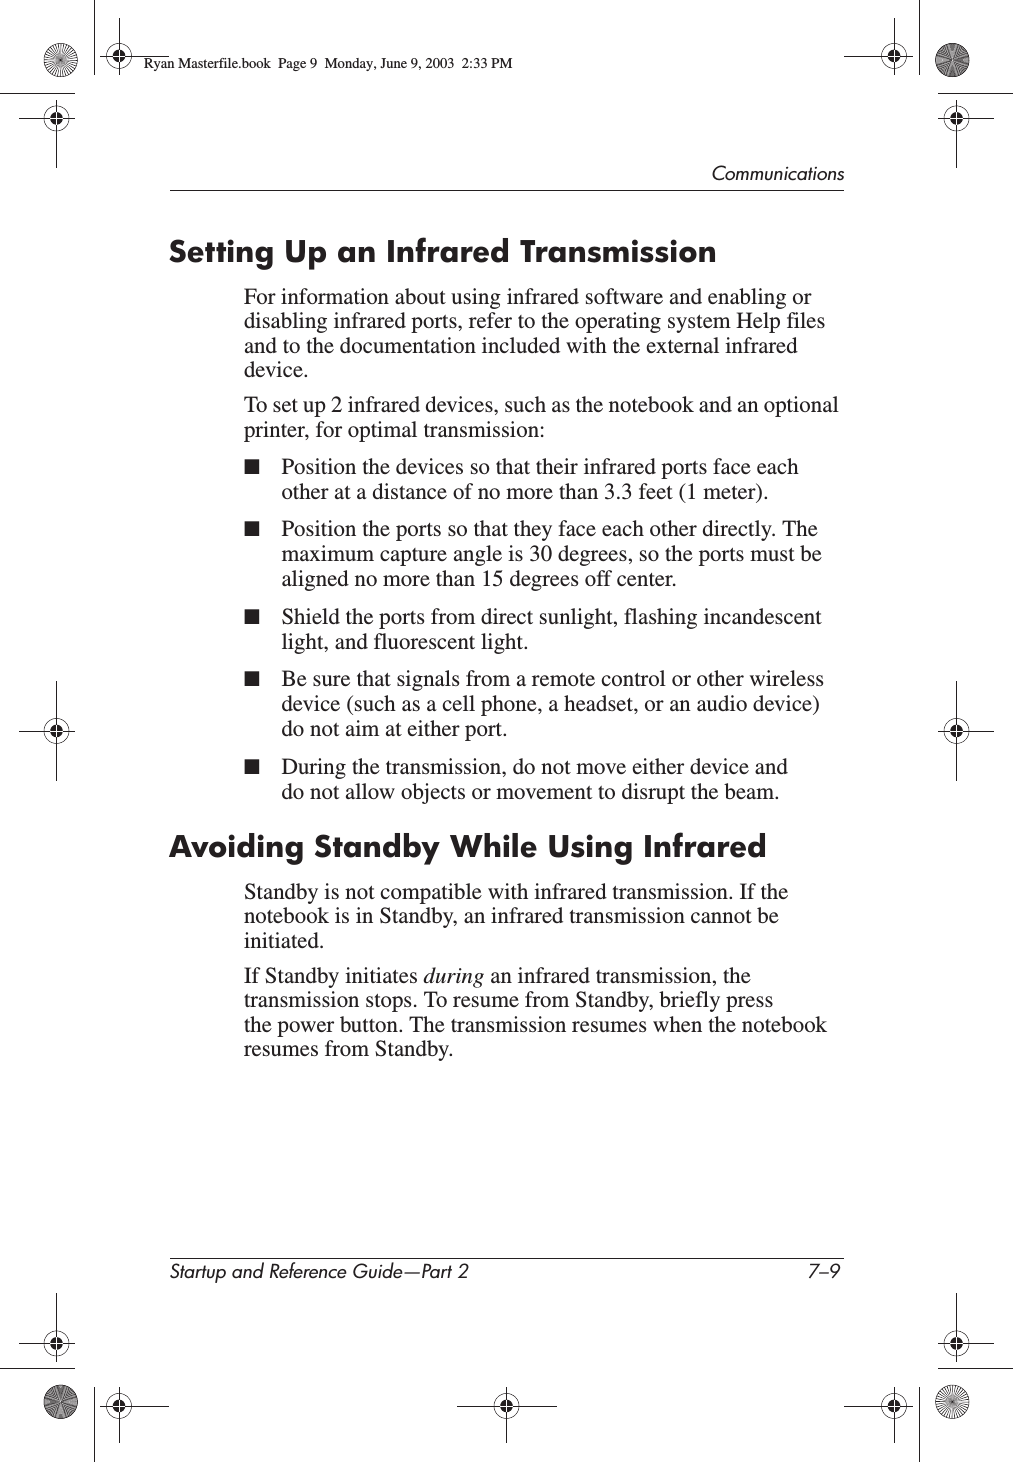 CommunicationsStartup and Reference Guide—Part 2 7–9Setting Up an Infrared TransmissionFor information about using infrared software and enabling or disabling infrared ports, refer to the operating system Help files and to the documentation included with the external infrared device.To set up 2 infrared devices, such as the notebook and an optional printer, for optimal transmission:■Position the devices so that their infrared ports face each other at a distance of no more than 3.3 feet (1 meter).■Position the ports so that they face each other directly. The maximum capture angle is 30 degrees, so the ports must be aligned no more than 15 degrees off center.■Shield the ports from direct sunlight, flashing incandescent light, and fluorescent light.■Be sure that signals from a remote control or other wireless device (such as a cell phone, a headset, or an audio device) do not aim at either port.■During the transmission, do not move either device and do not allow objects or movement to disrupt the beam.Avoiding Standby While Using InfraredStandby is not compatible with infrared transmission. If the notebook is in Standby, an infrared transmission cannot be initiated.If Standby initiates during an infrared transmission, the transmission stops. To resume from Standby, briefly press the power button. The transmission resumes when the notebook resumes from Standby.Ryan Masterfile.book  Page 9  Monday, June 9, 2003  2:33 PM